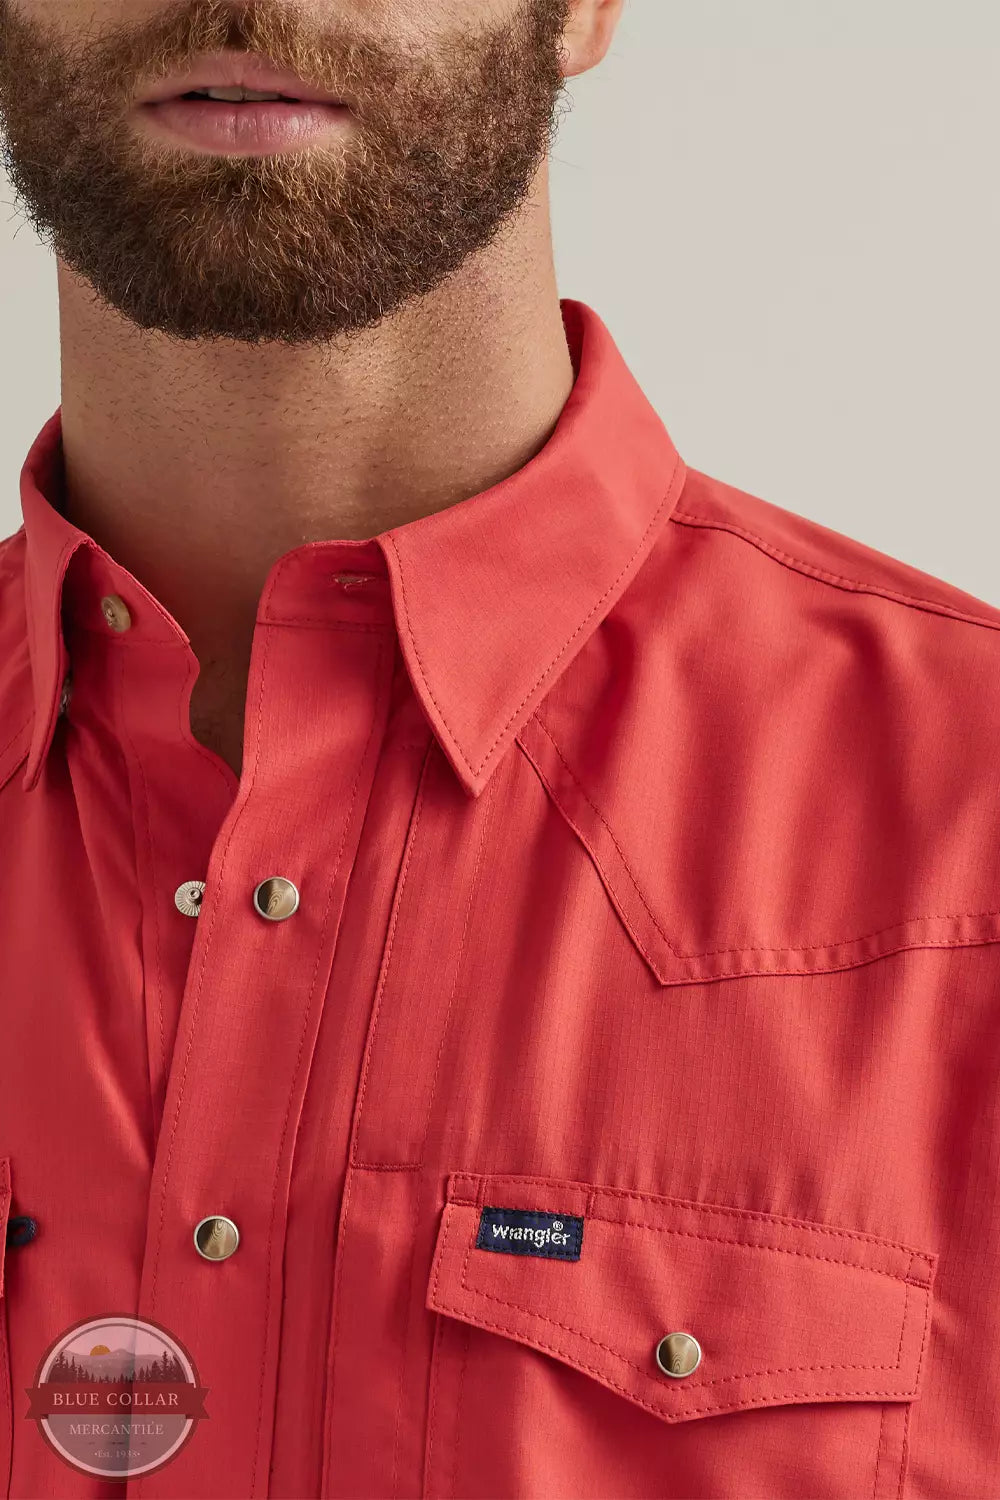 Wrangler 112344571 Performance Snap Shirt in Red Front Detail View